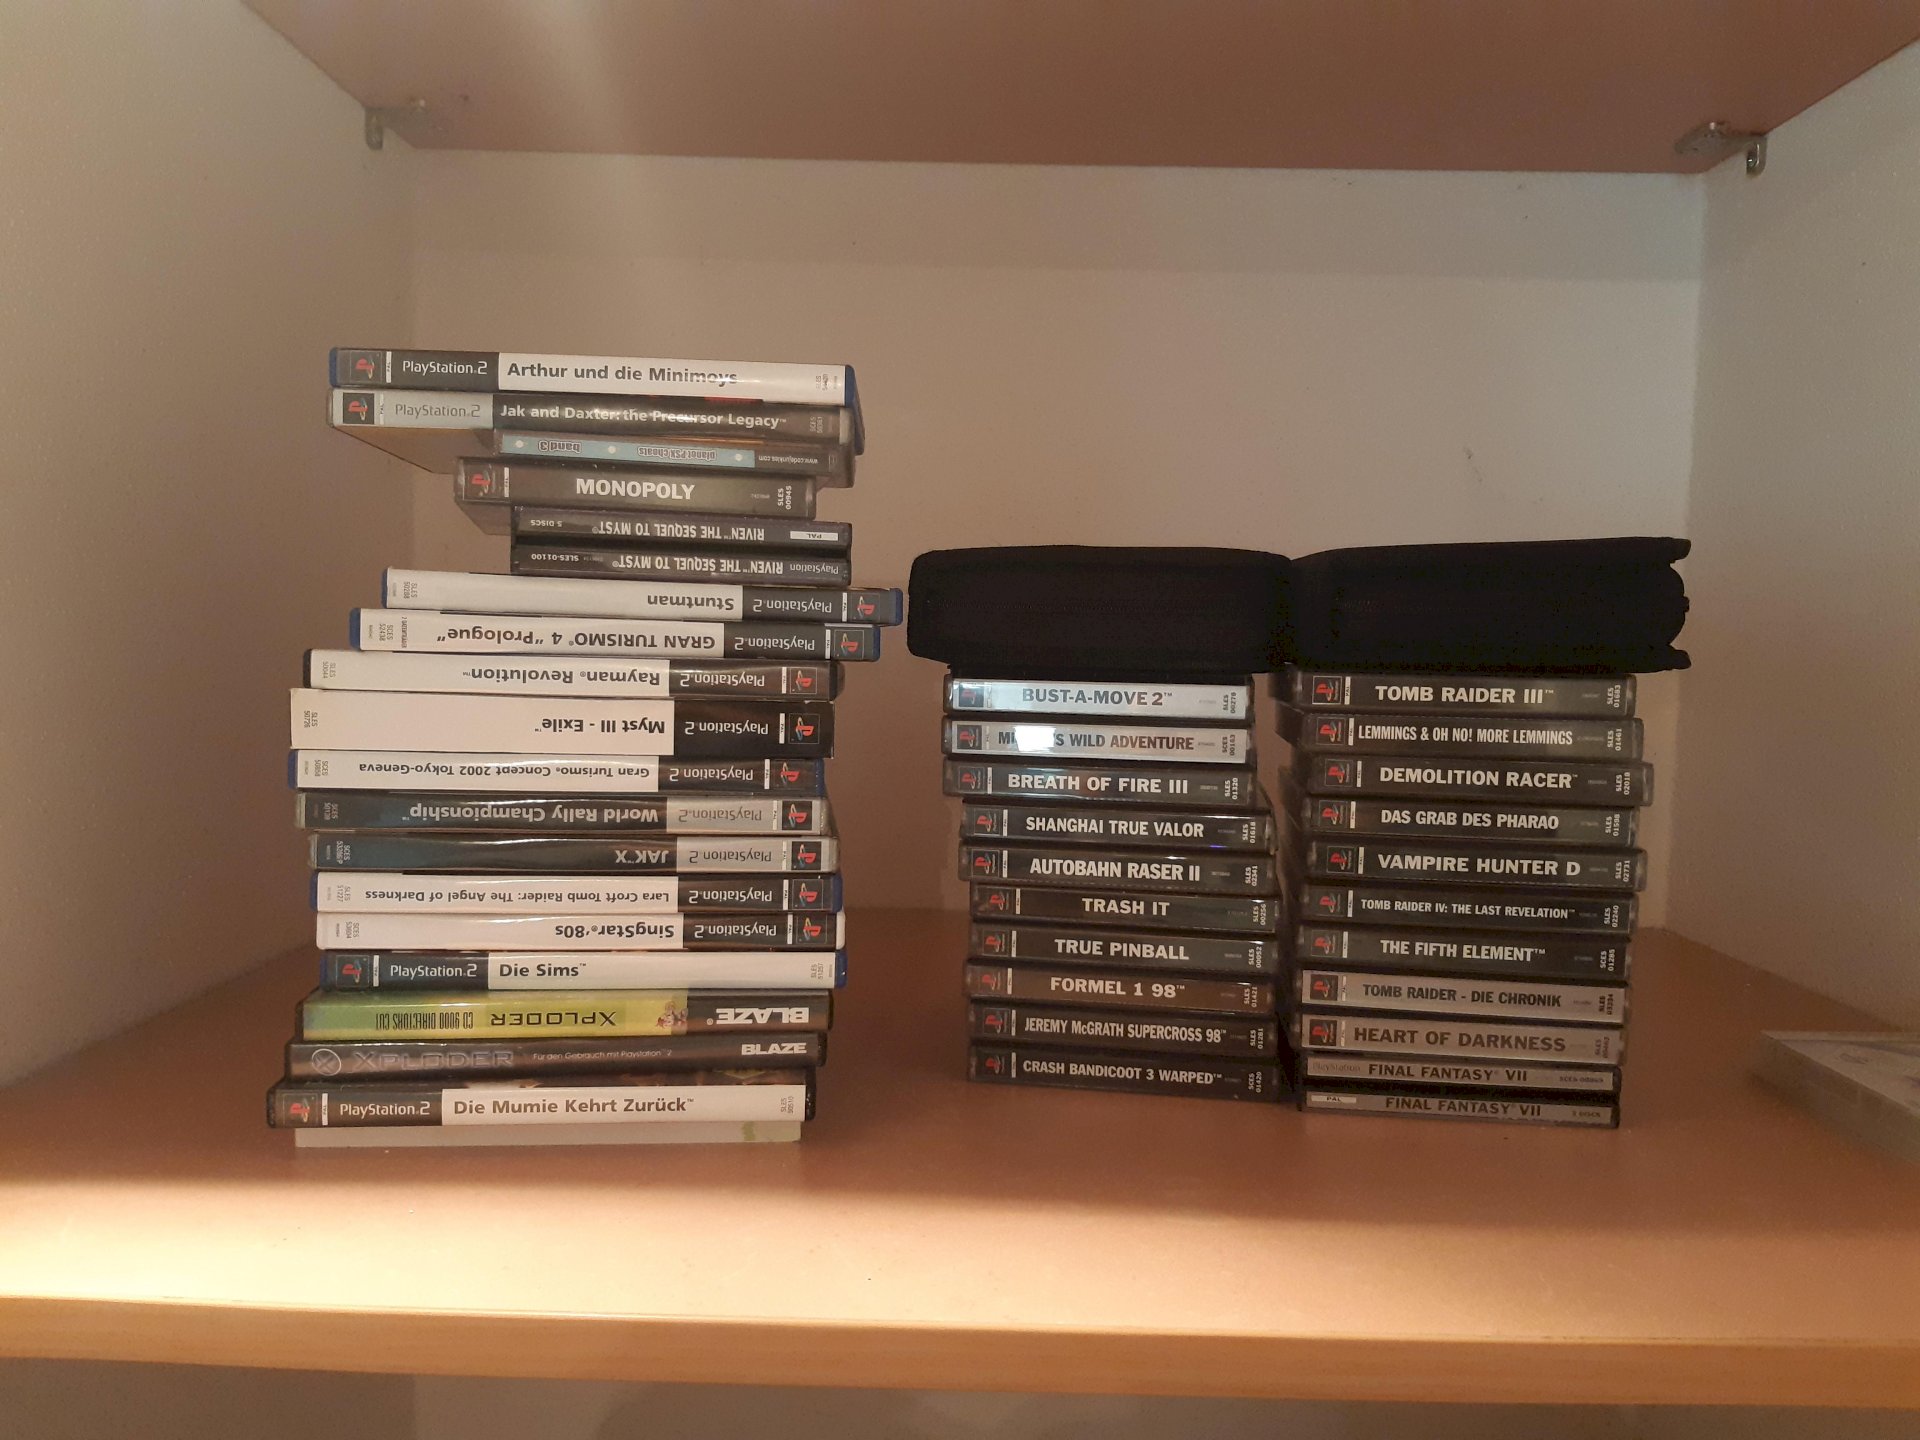 Value of this game collection PS1, PS2, Nintendo DS, Nintendo3DS